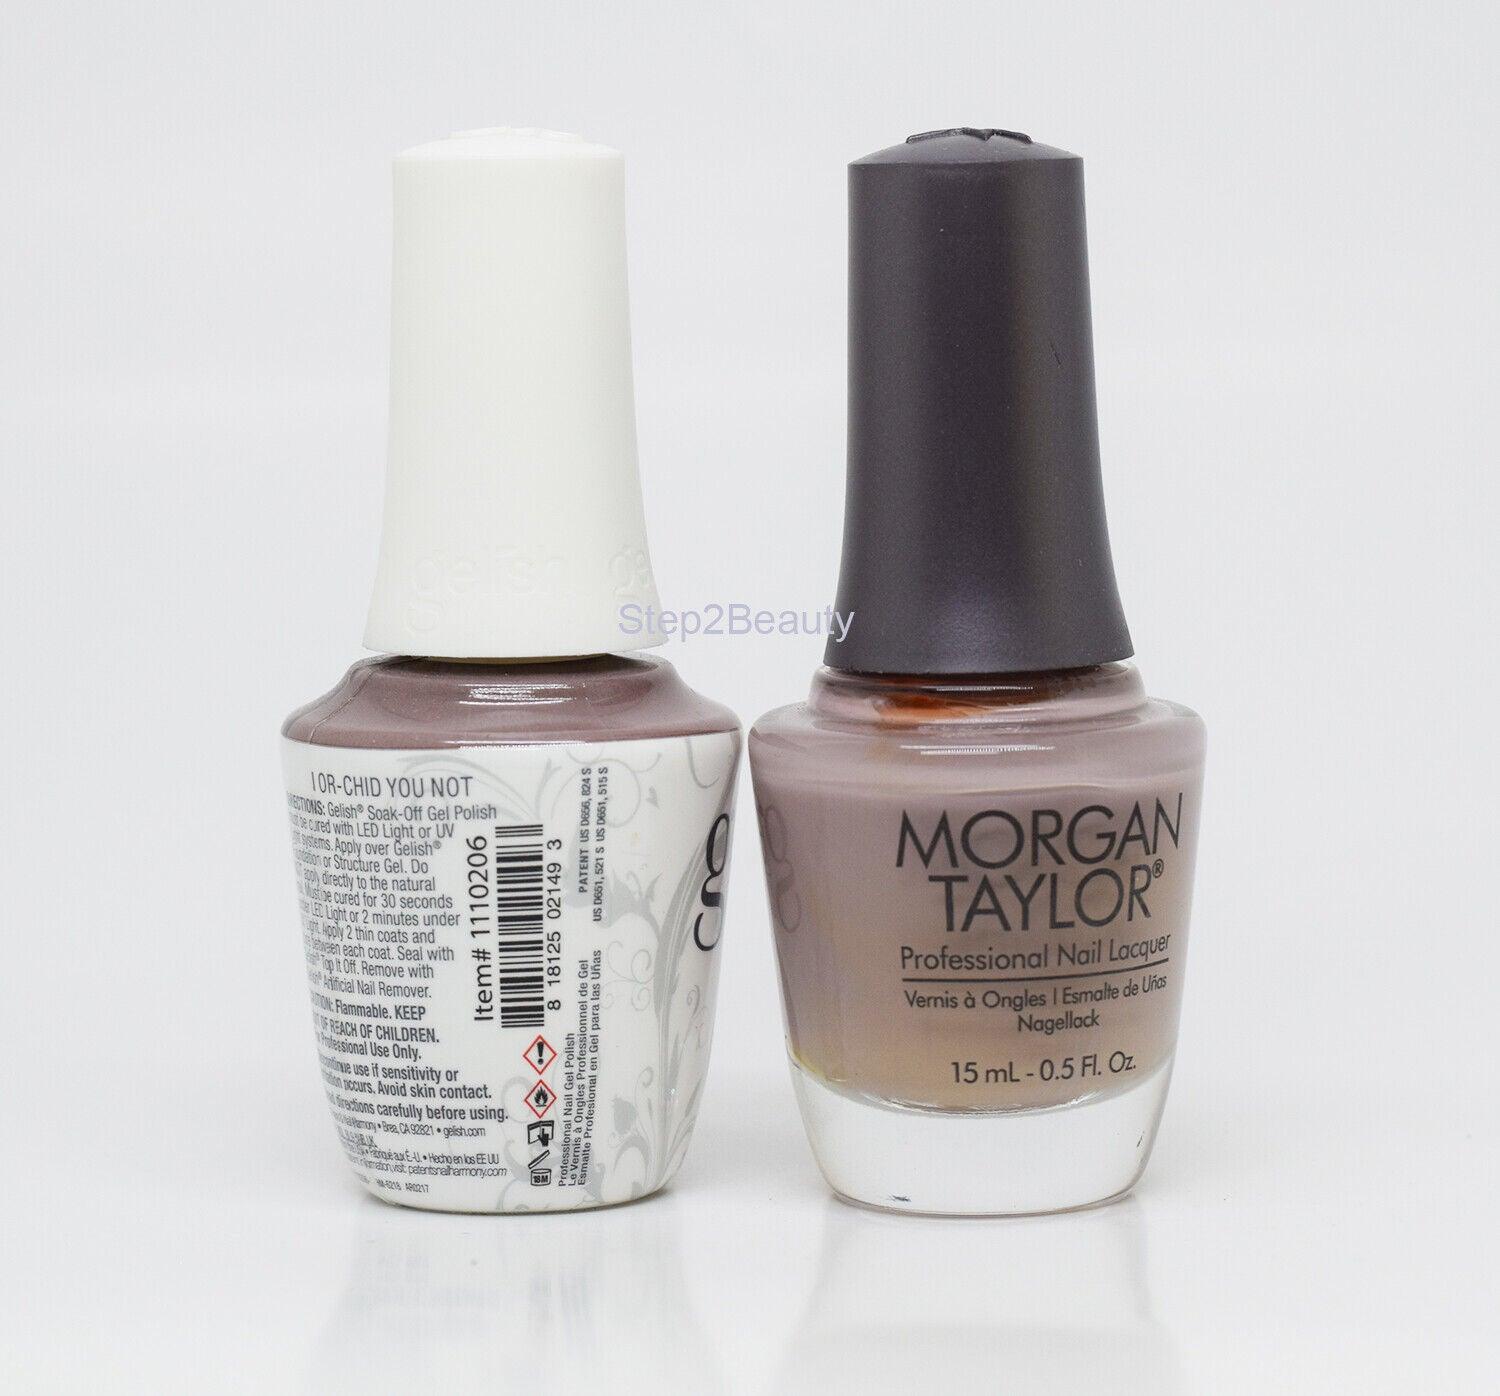 Gelish DUO Soak Off Gel Polish + Morgan Taylor Lacquer - #206 I Or-chid You Not